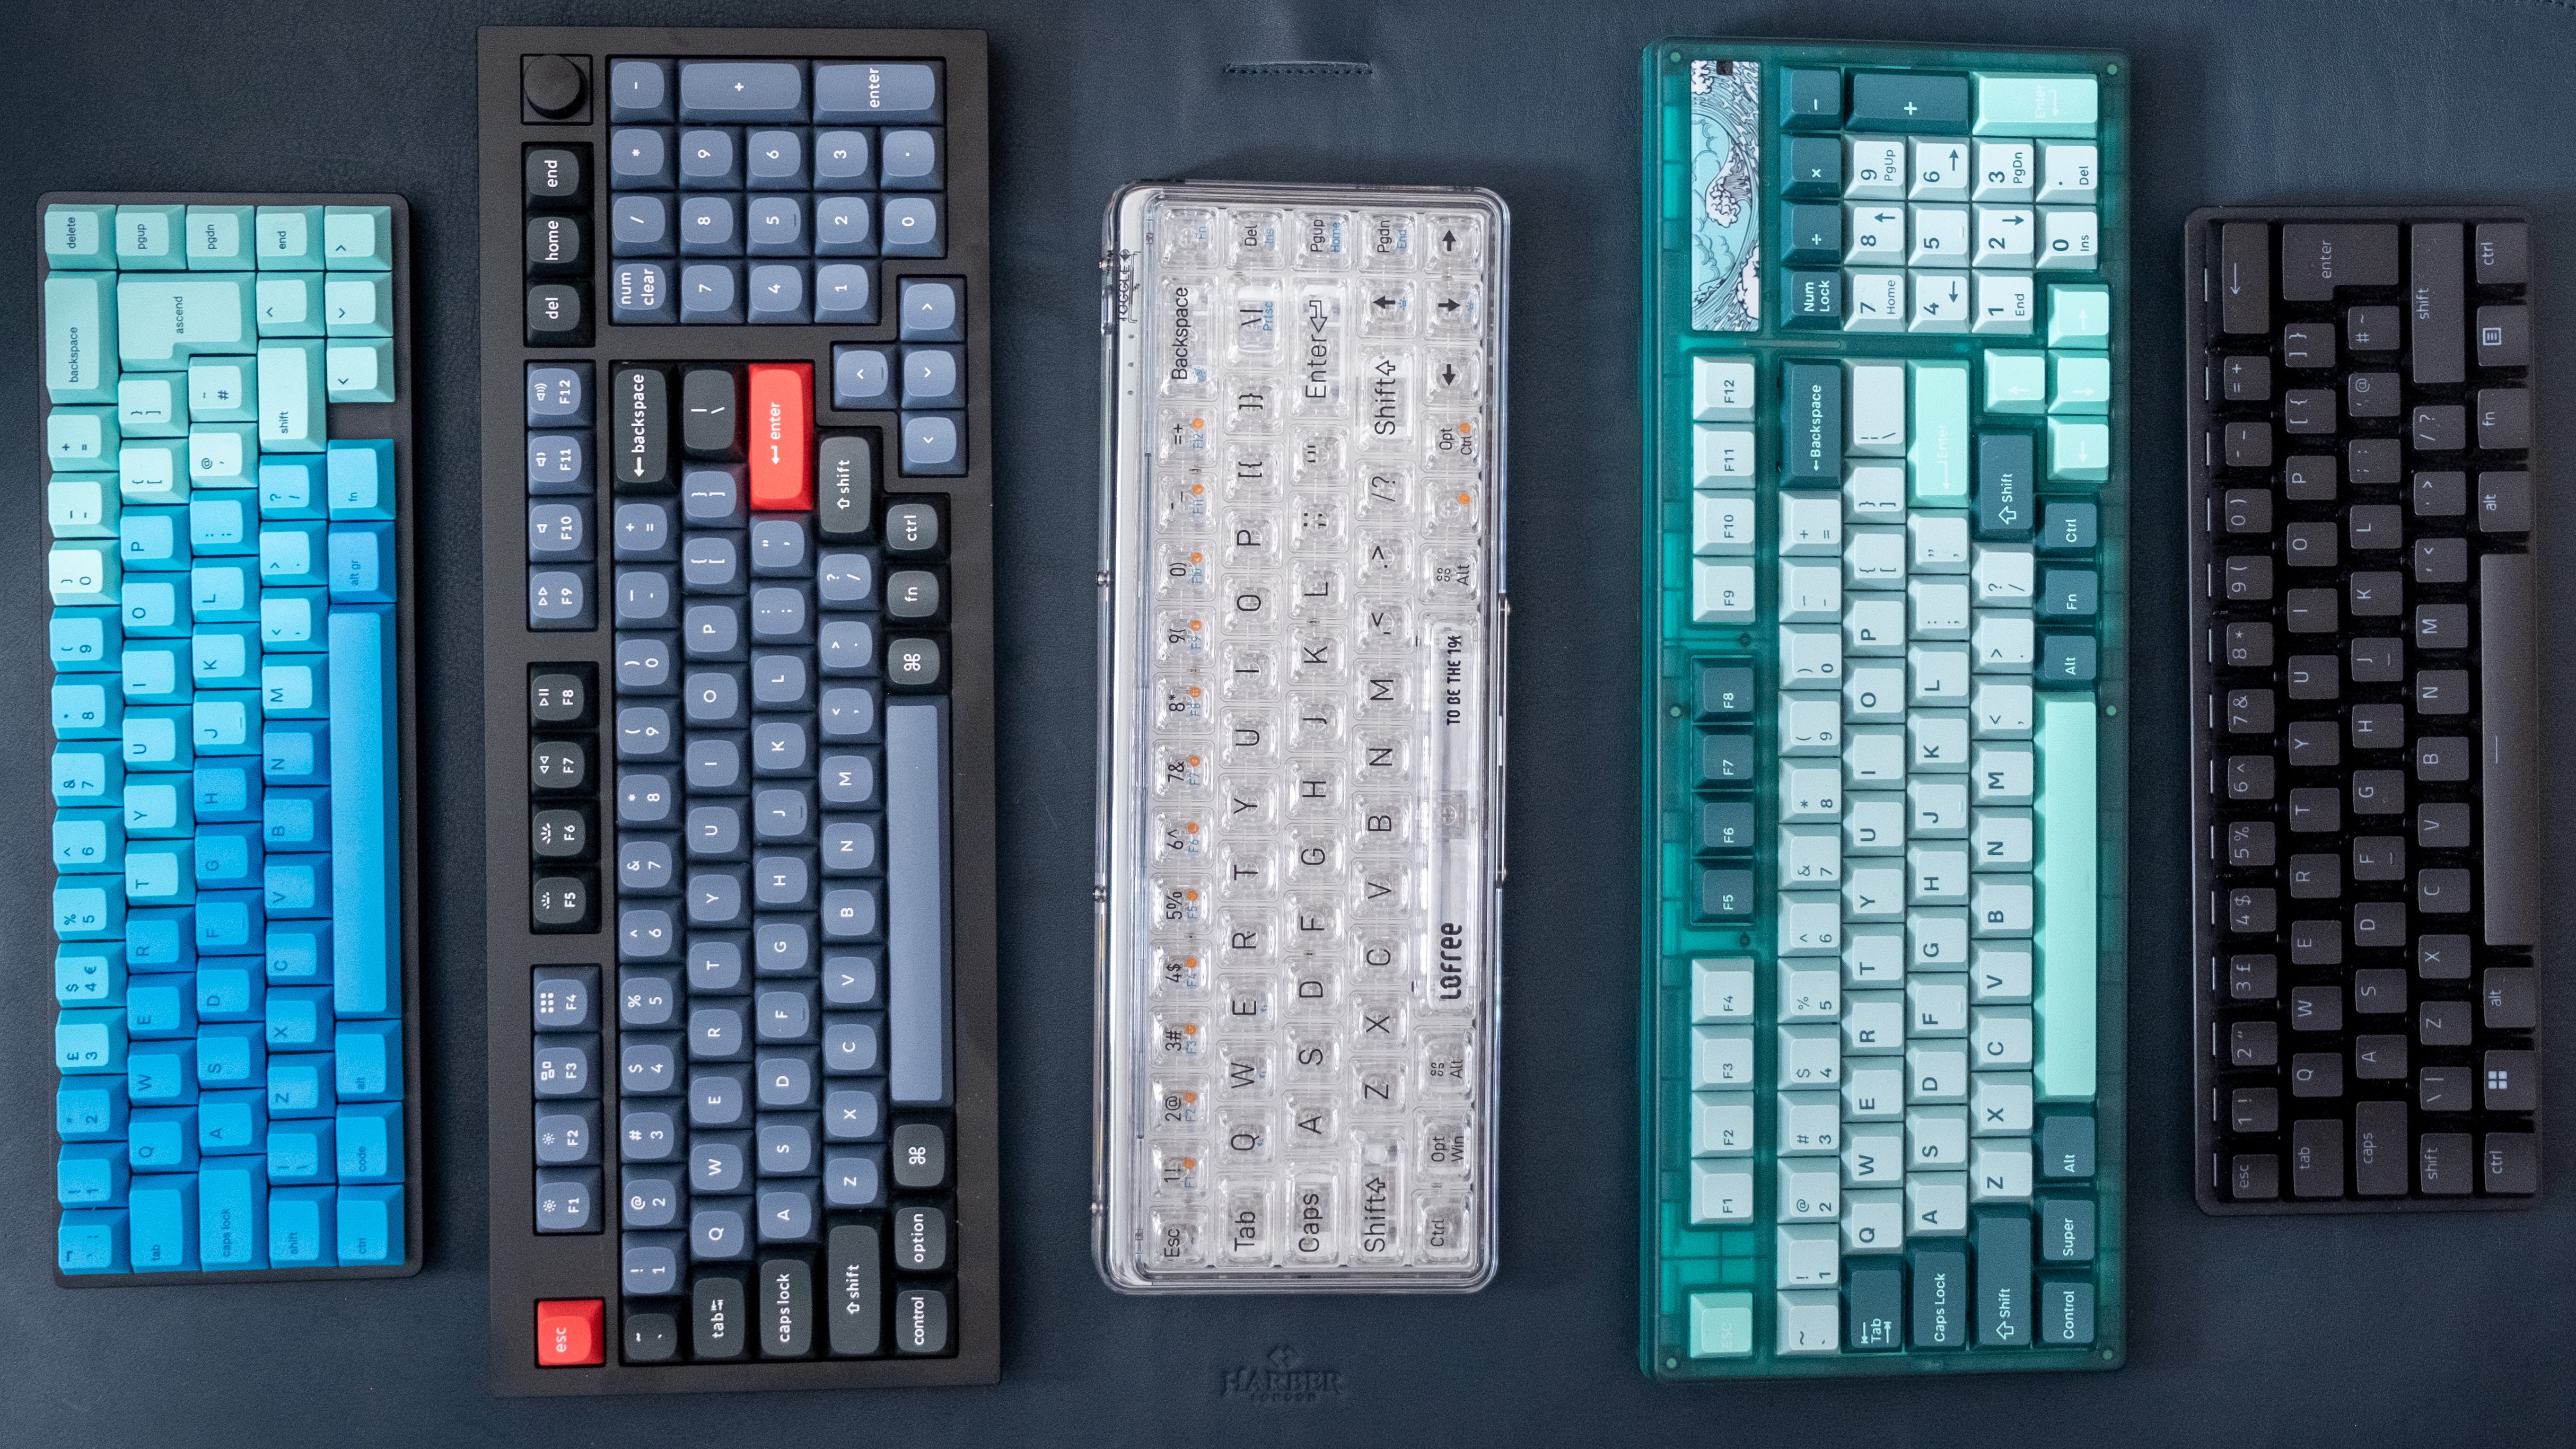 keyboards arranged in a line, featuring interesting colour schemes, form factors and features